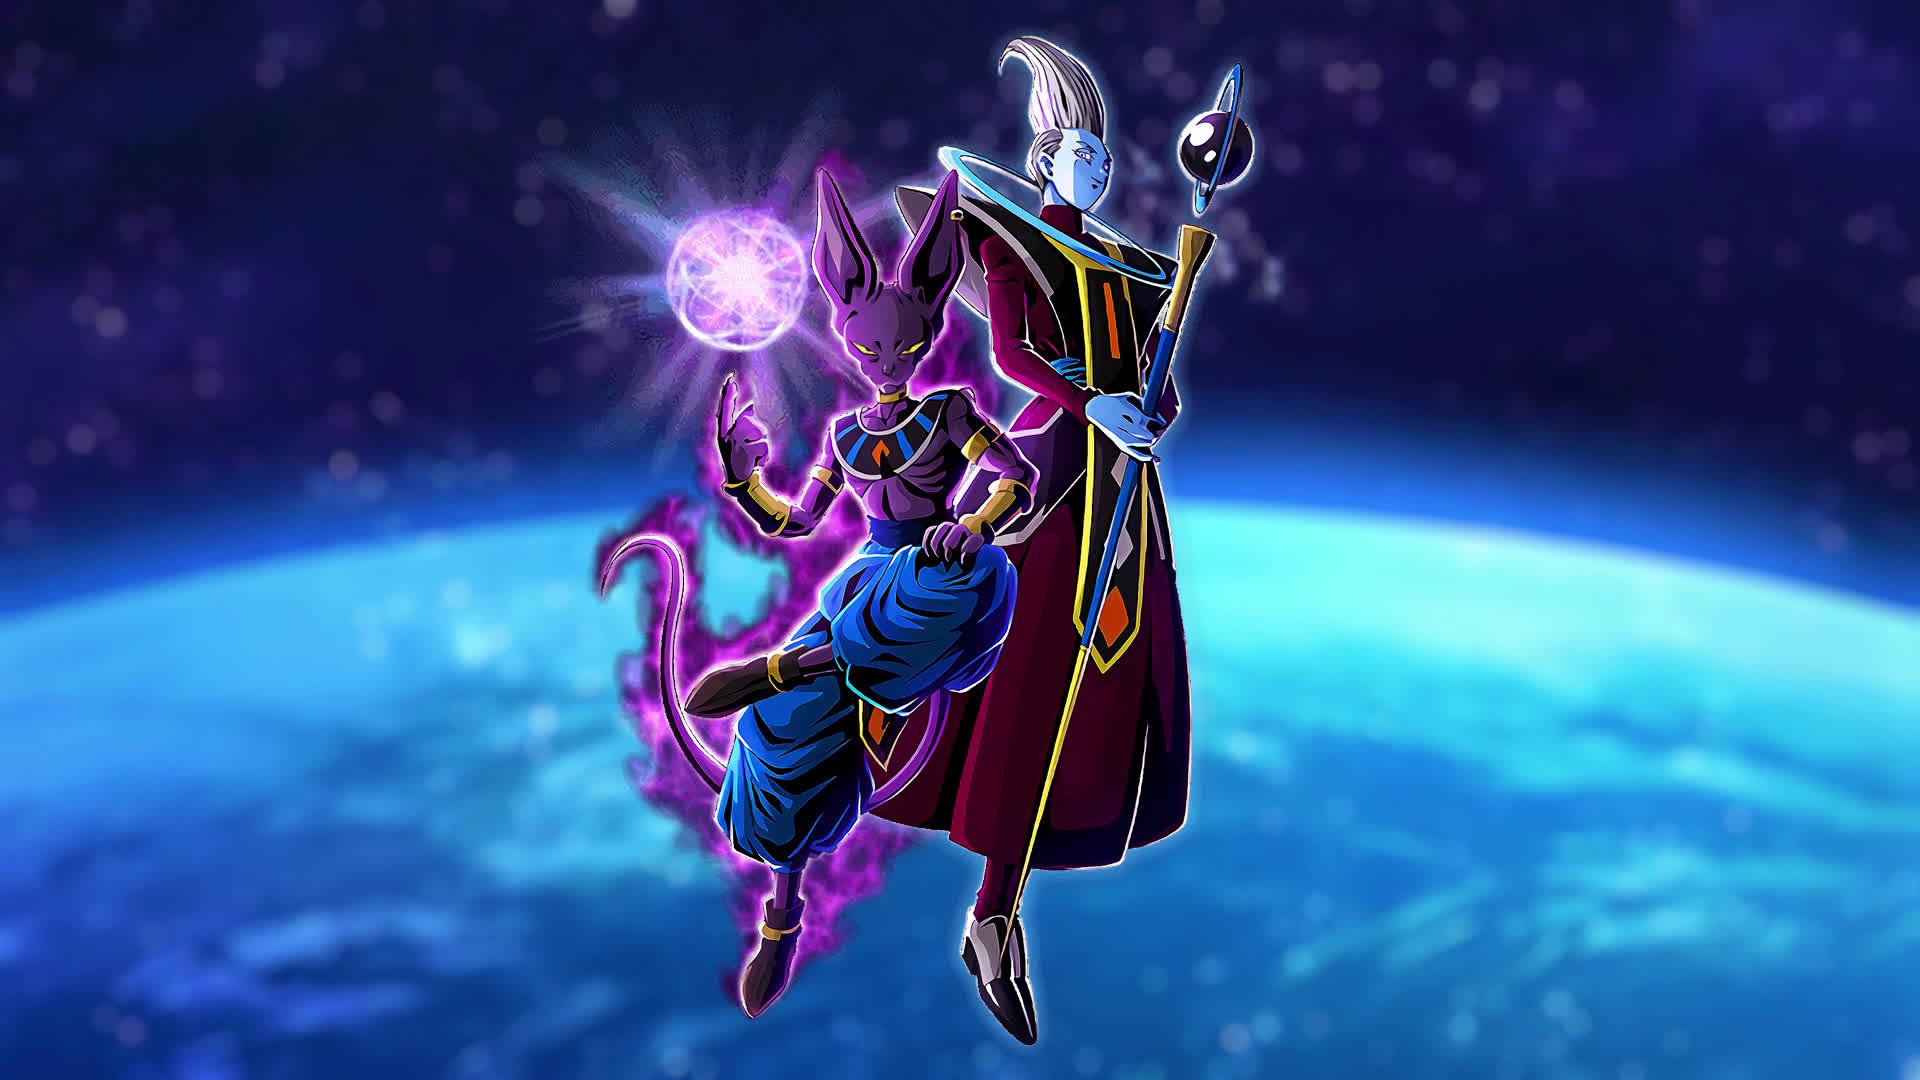 DBS Beerus & Whis Live Wallpapers Free.